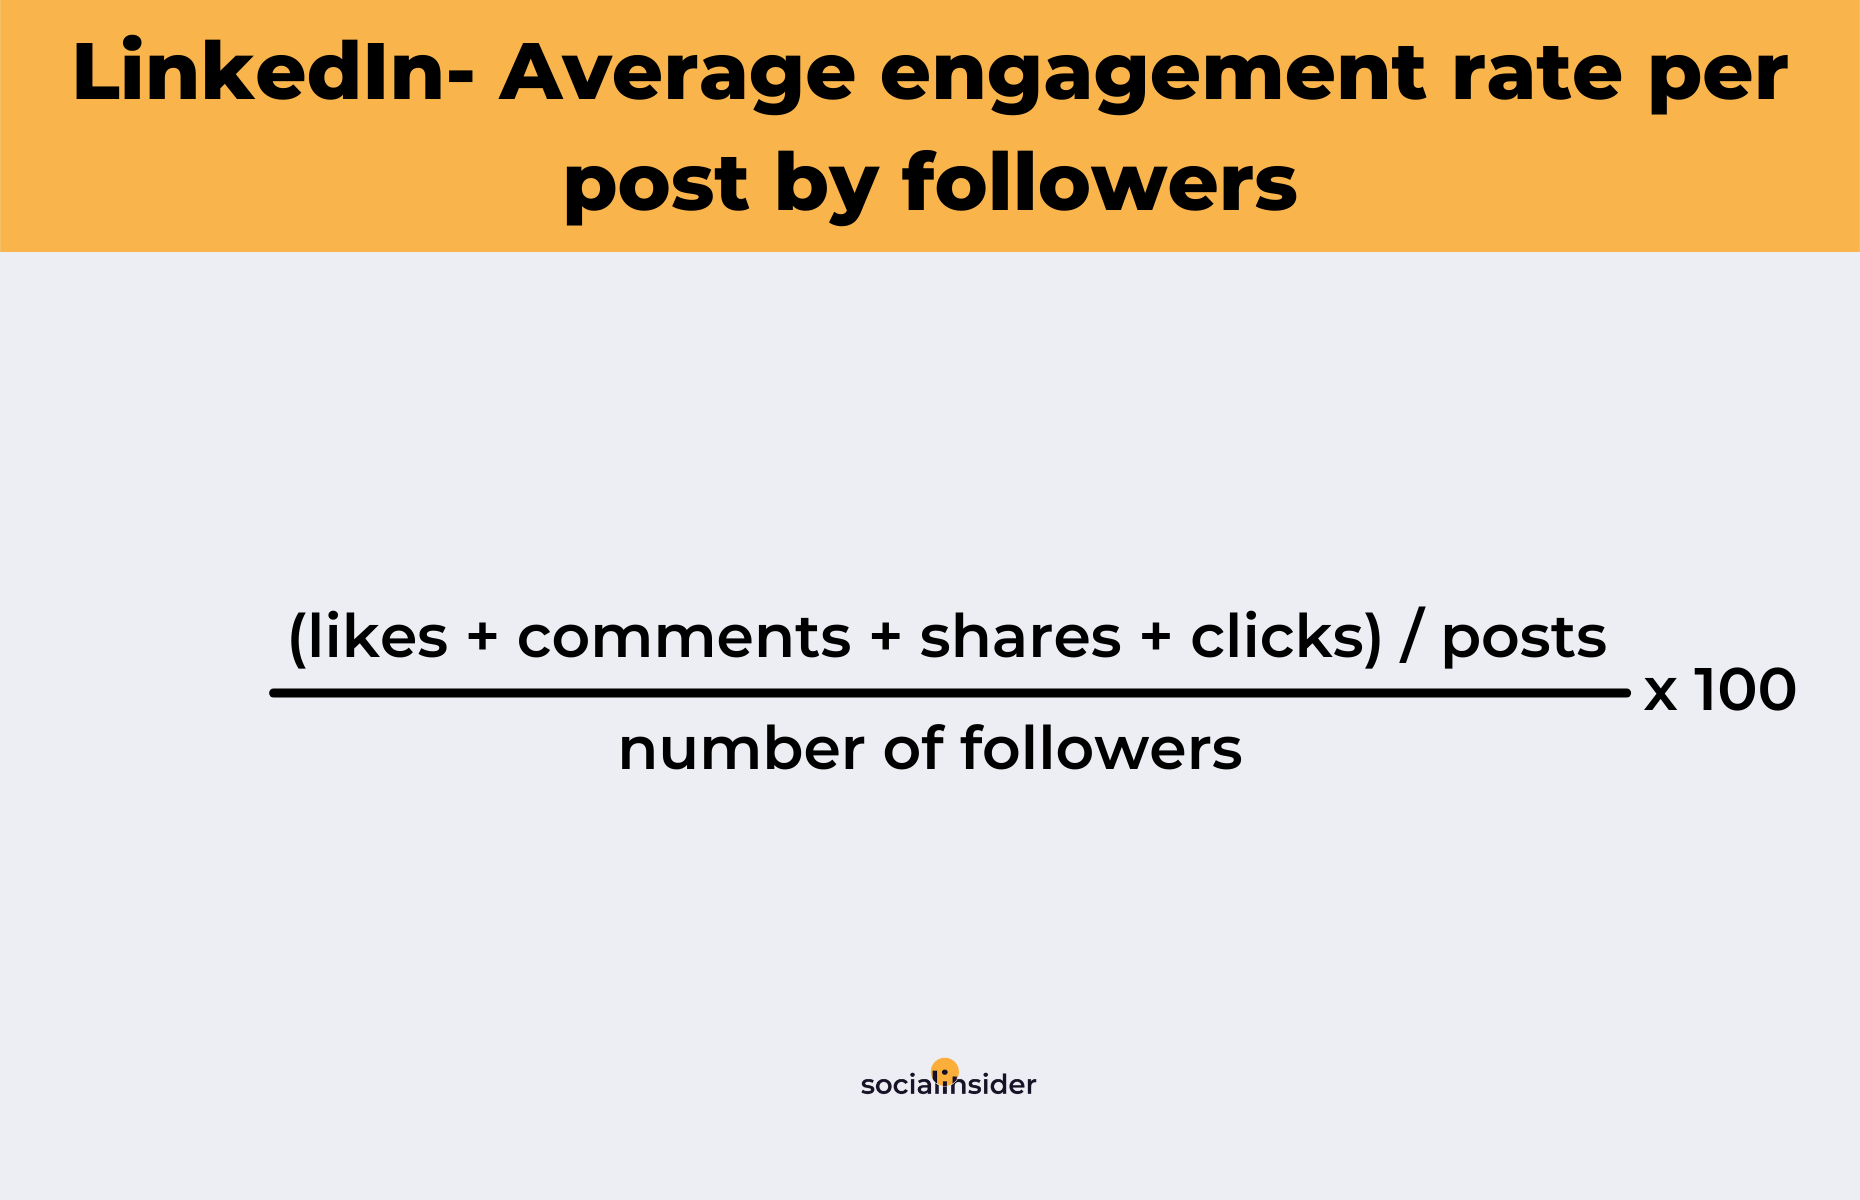 How to calculate the average engagement rate on LinkedIn